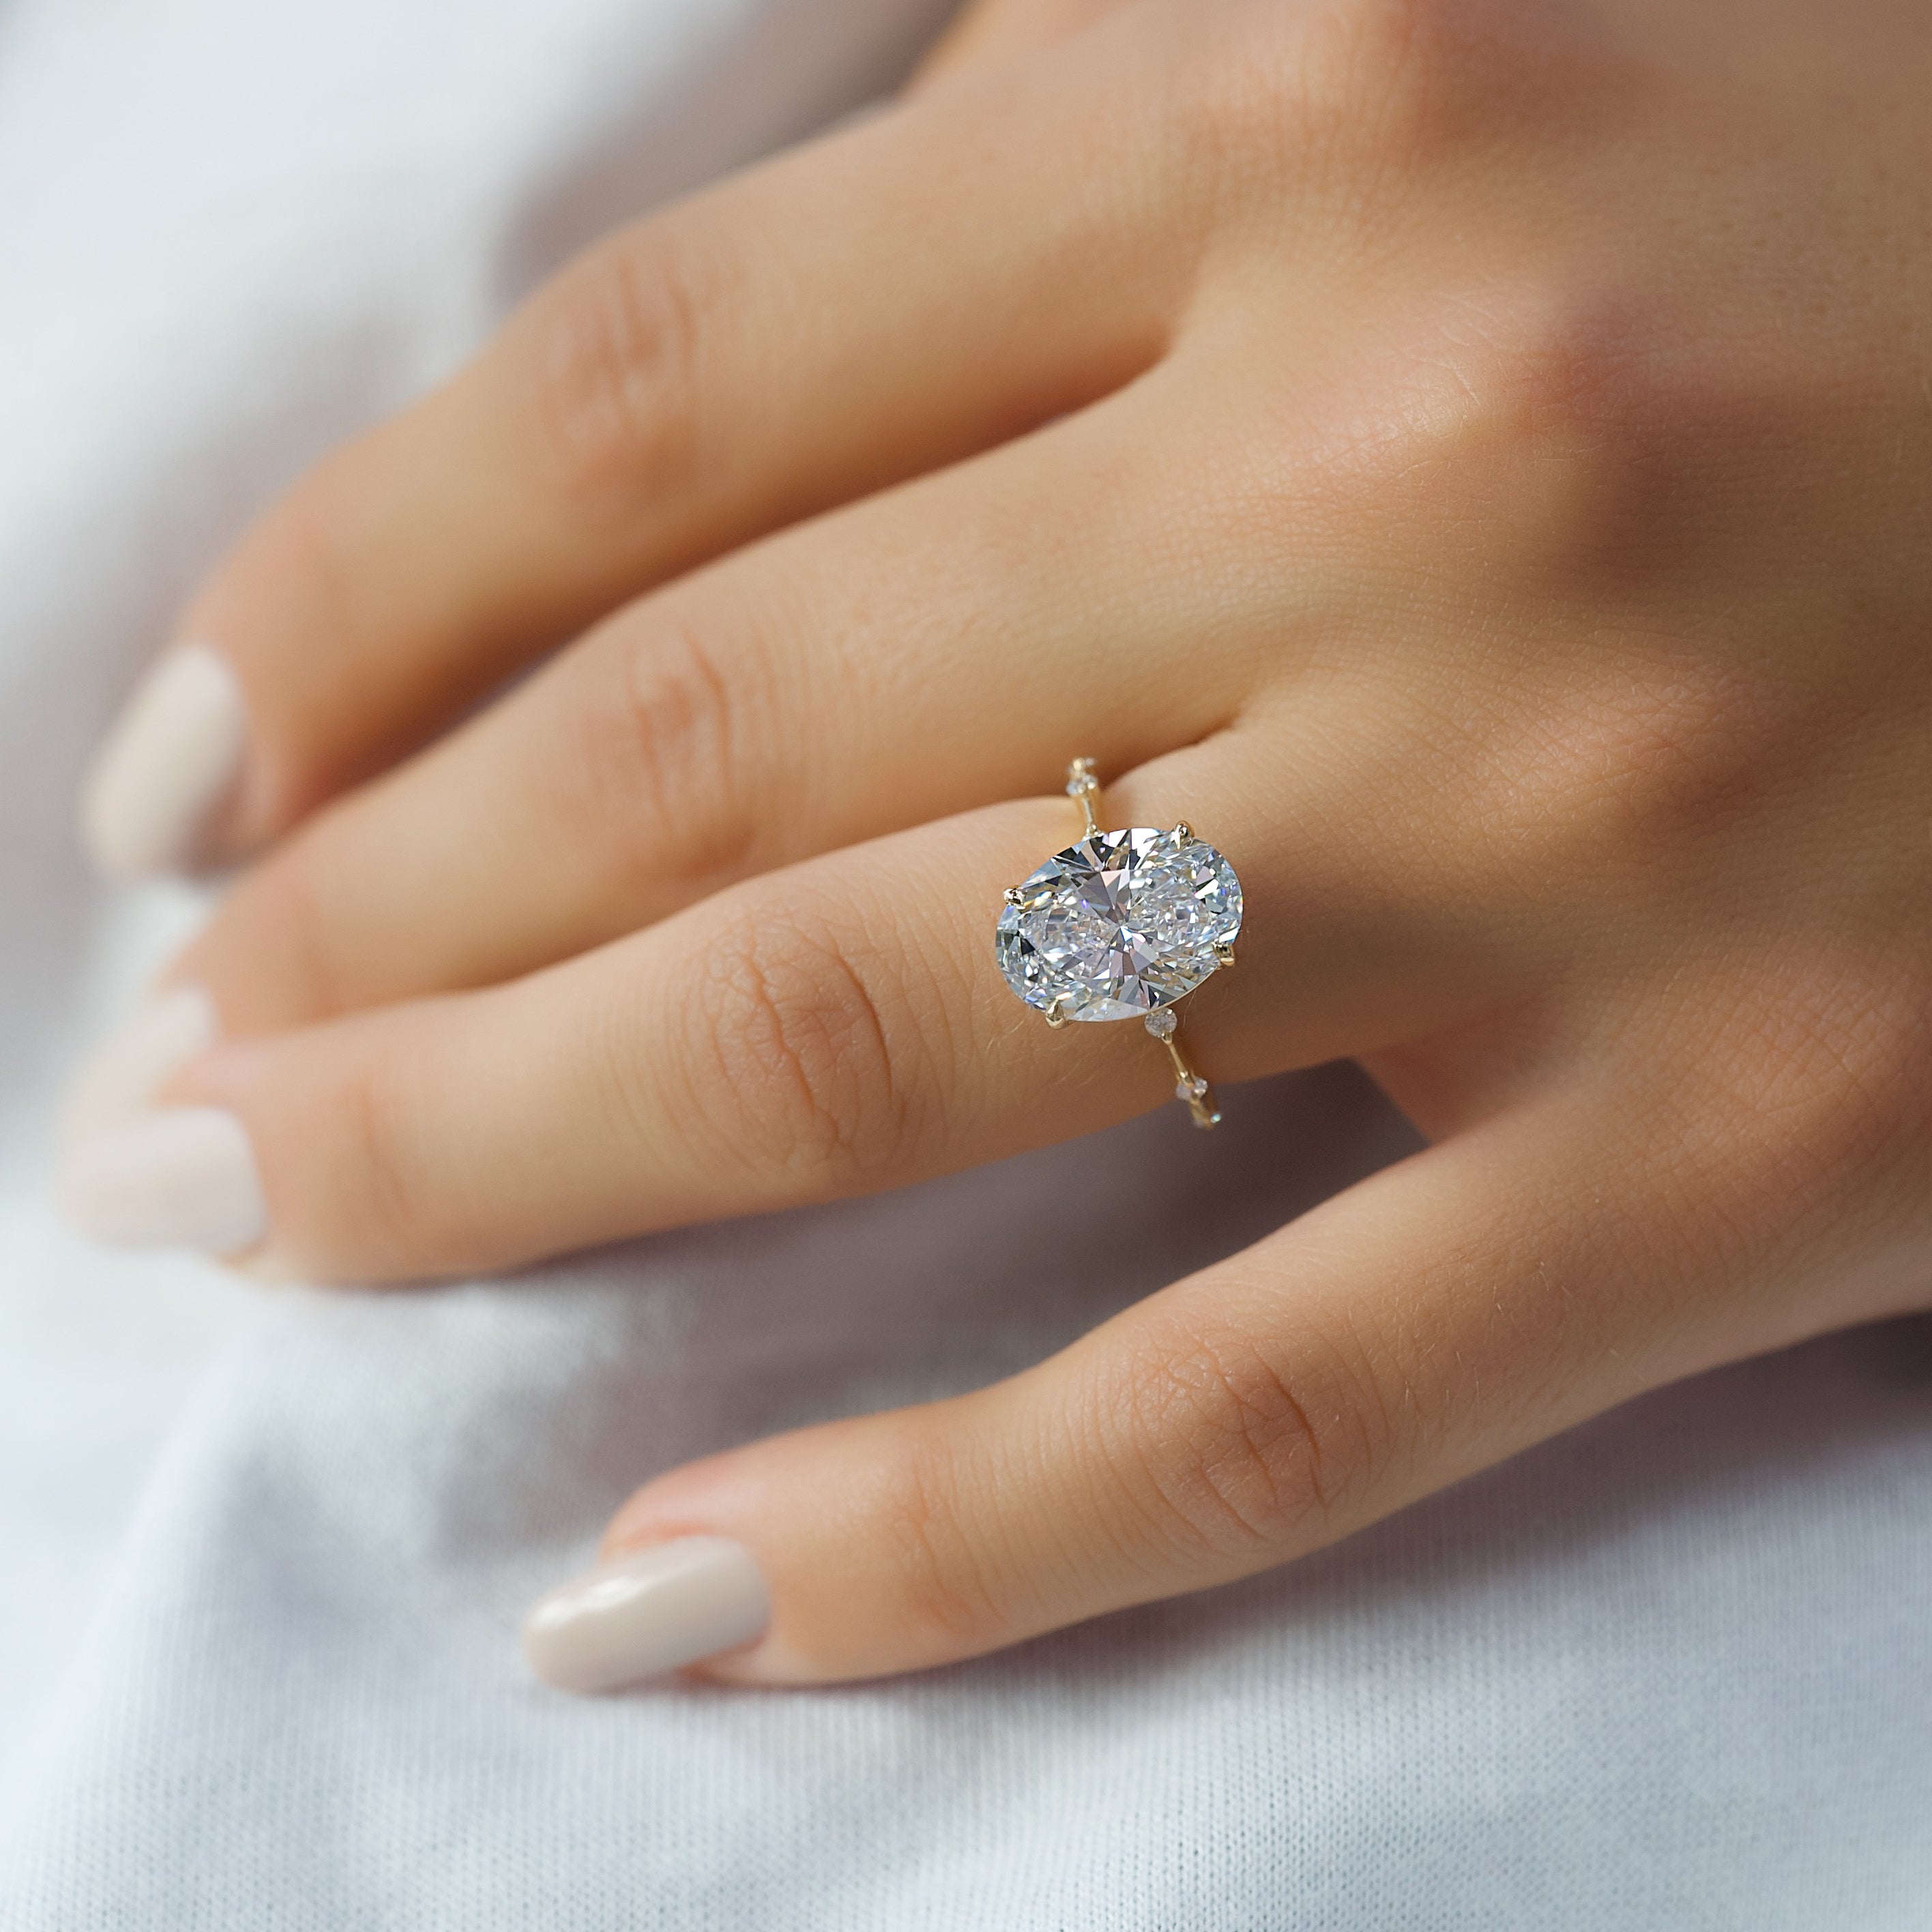 What Does a 4ct Diamond Ring Look Like On Your Hand?